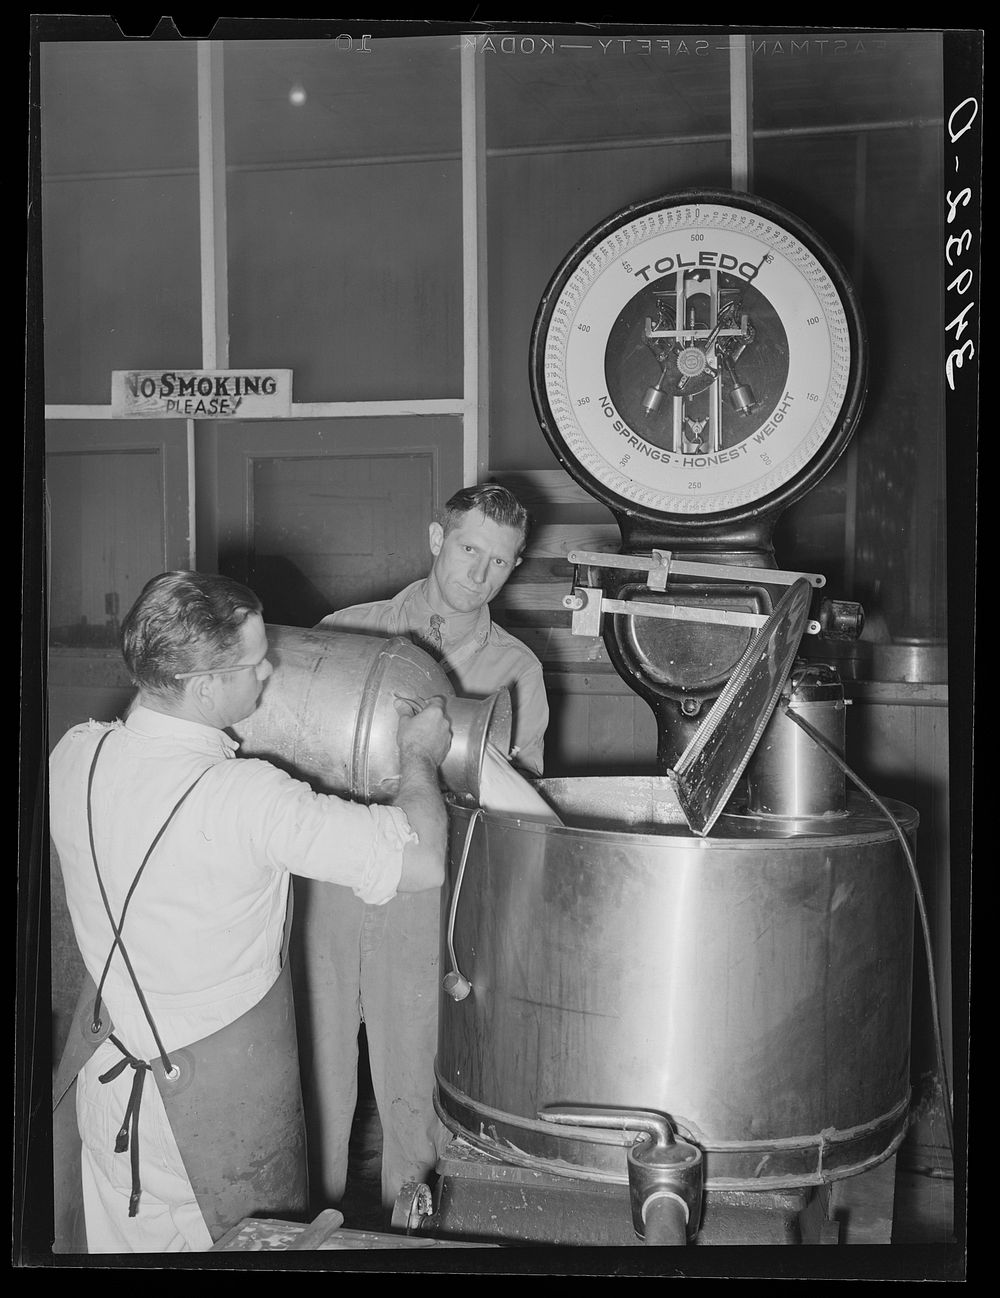 Unloading milk at creamery. San Angelo, Texas. The milk is weighed in this large kettle by Russell Lee